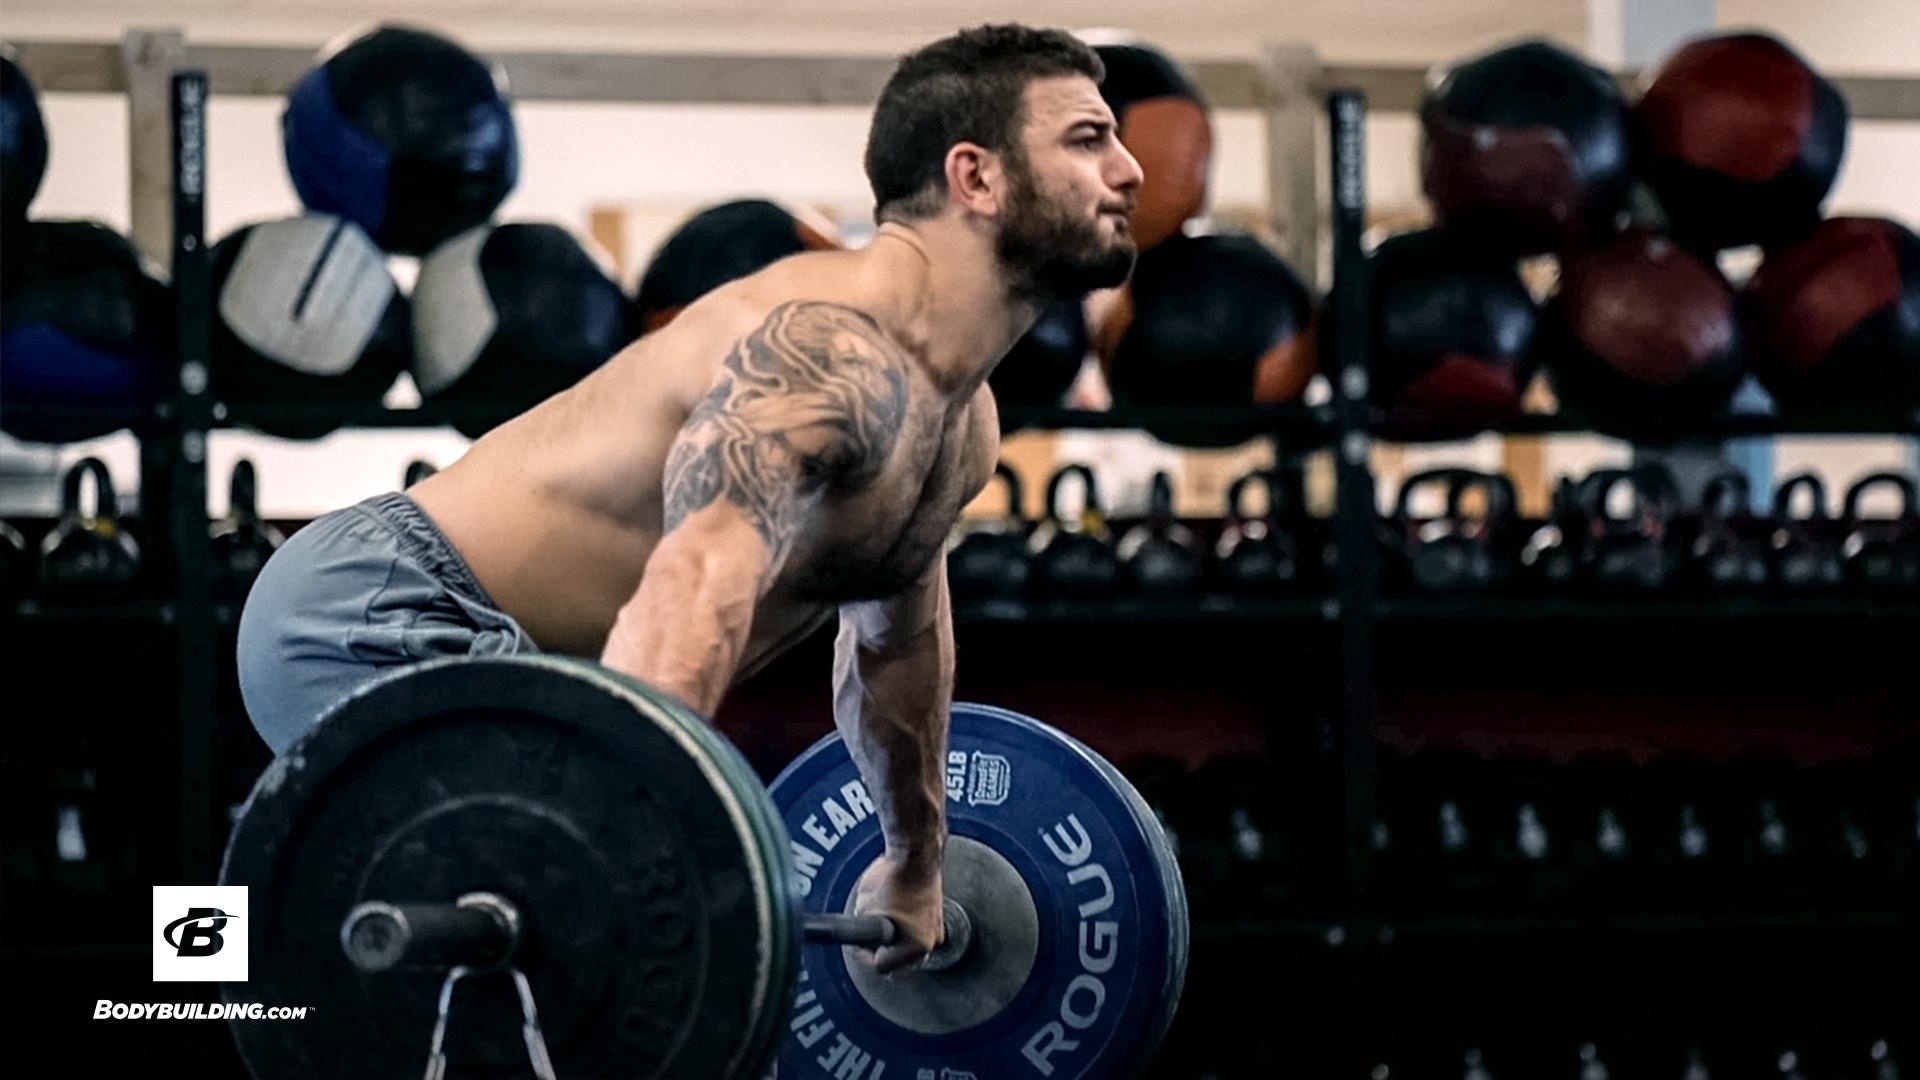 Mat Fraser Didn't Want to Do Crossfit. The Making of a Champion